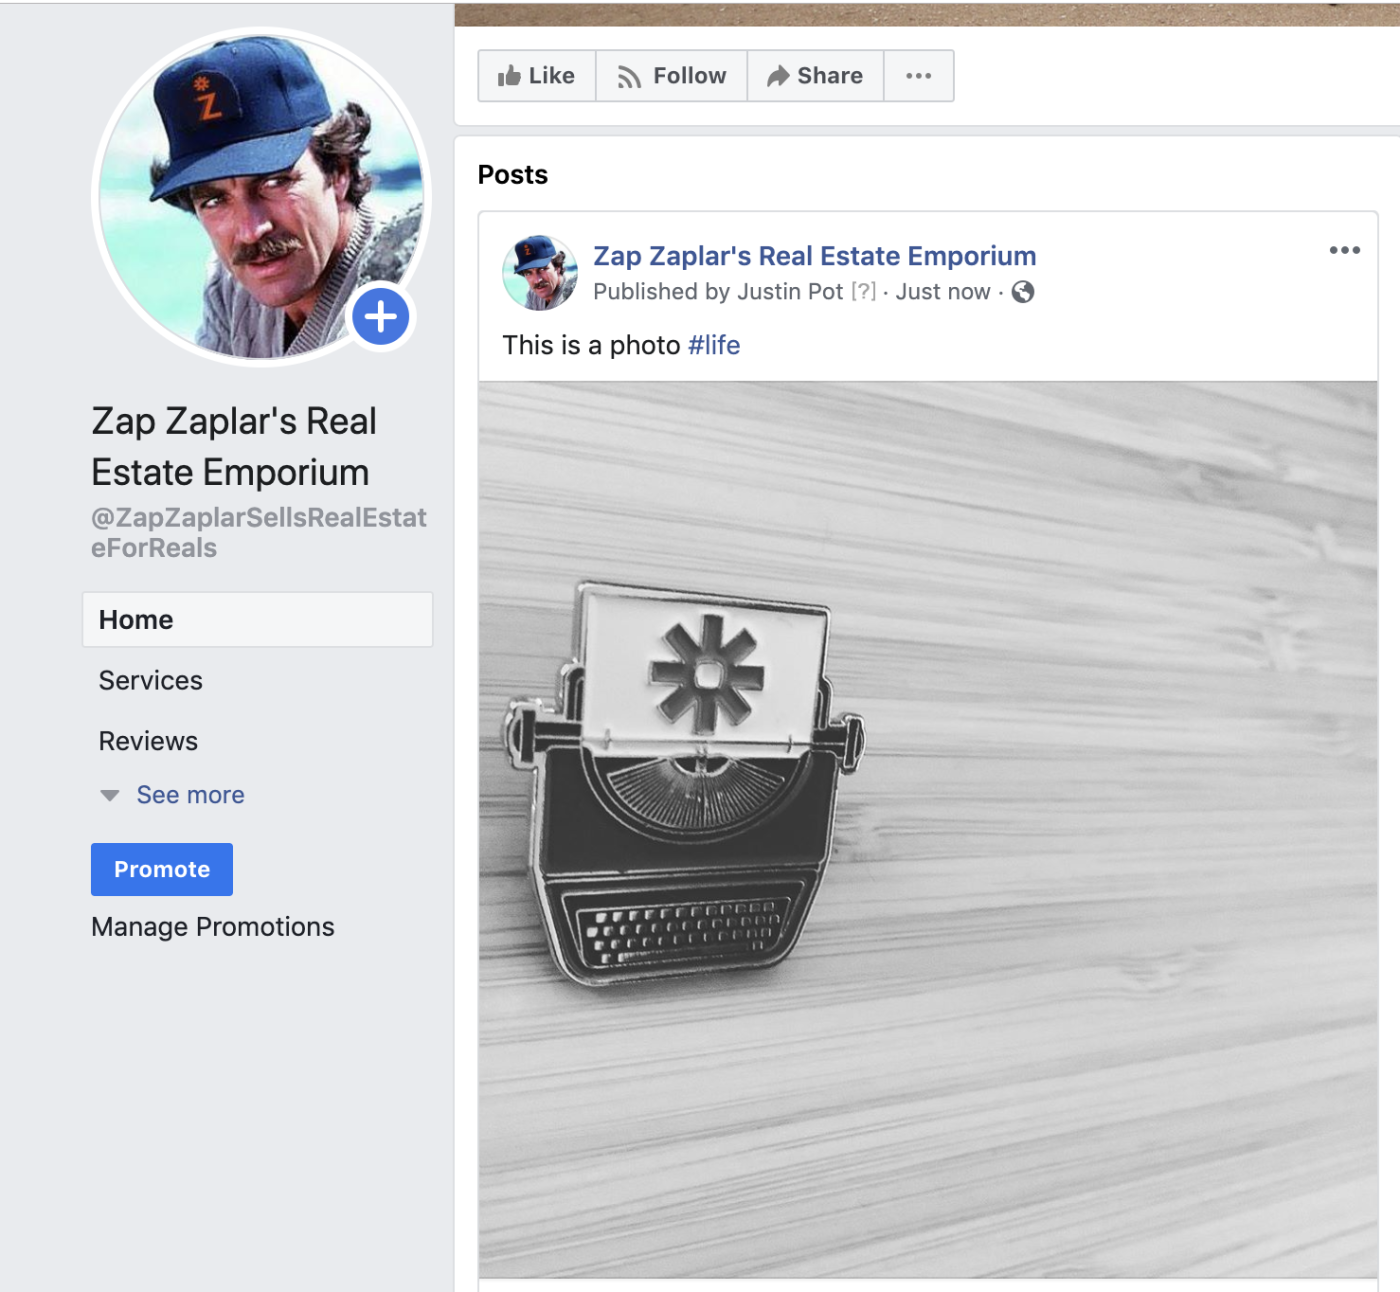 How to Link Instagram to Facebook Business Page - feedalpha